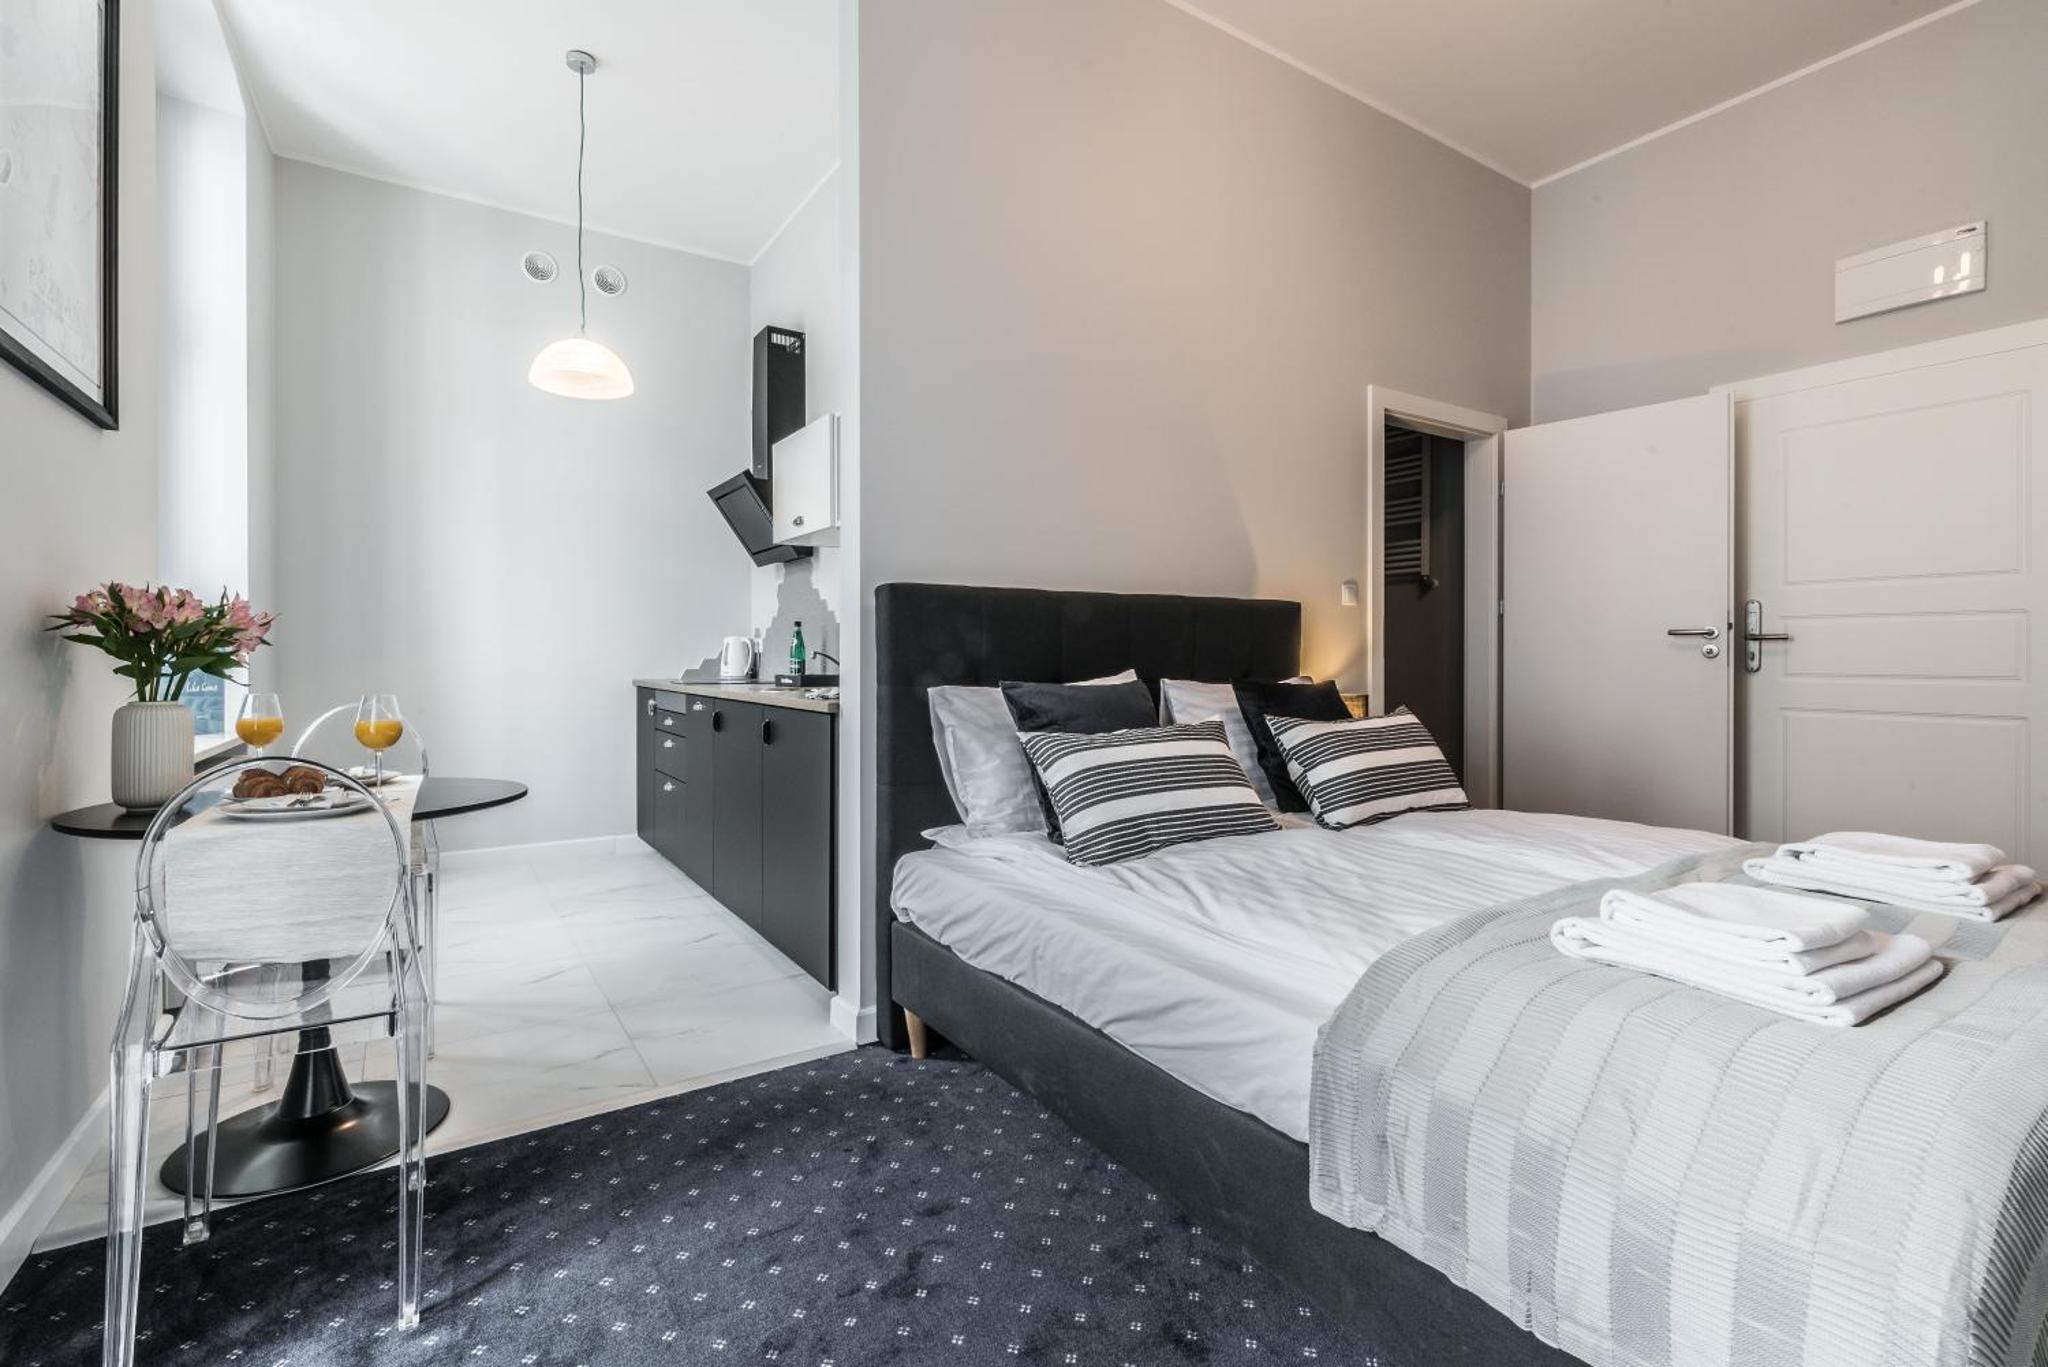 SERENITY Residence - Old Town Poznan by Friendly Apartments